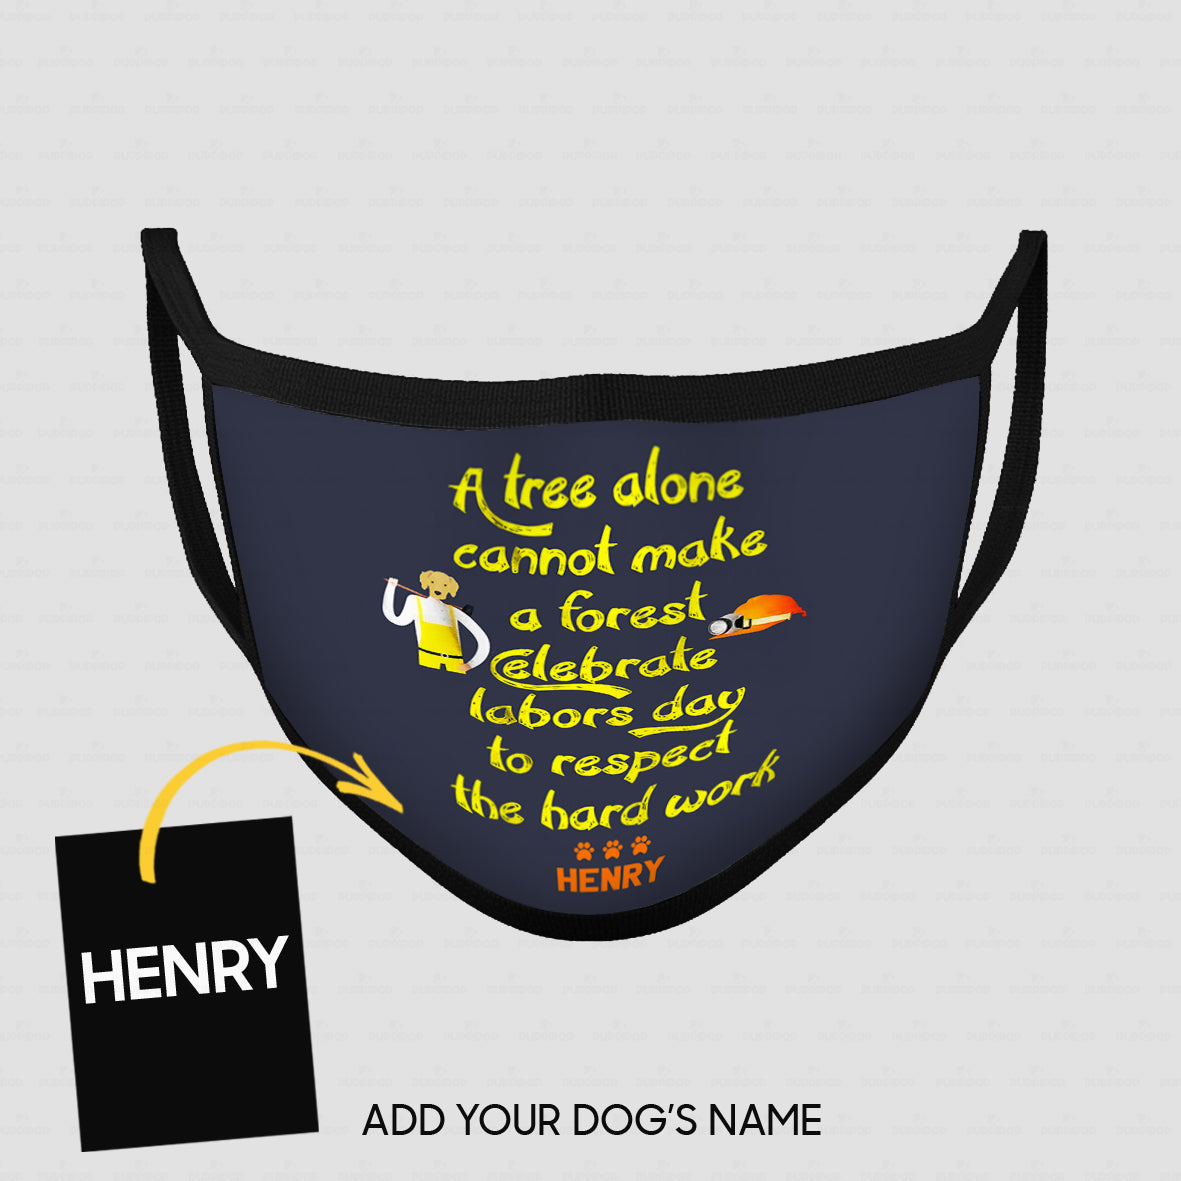 Personalized Dog Gift Idea - Celebrate Labors Day To Respect The Hard Work For Dog Lovers - Cloth Mask